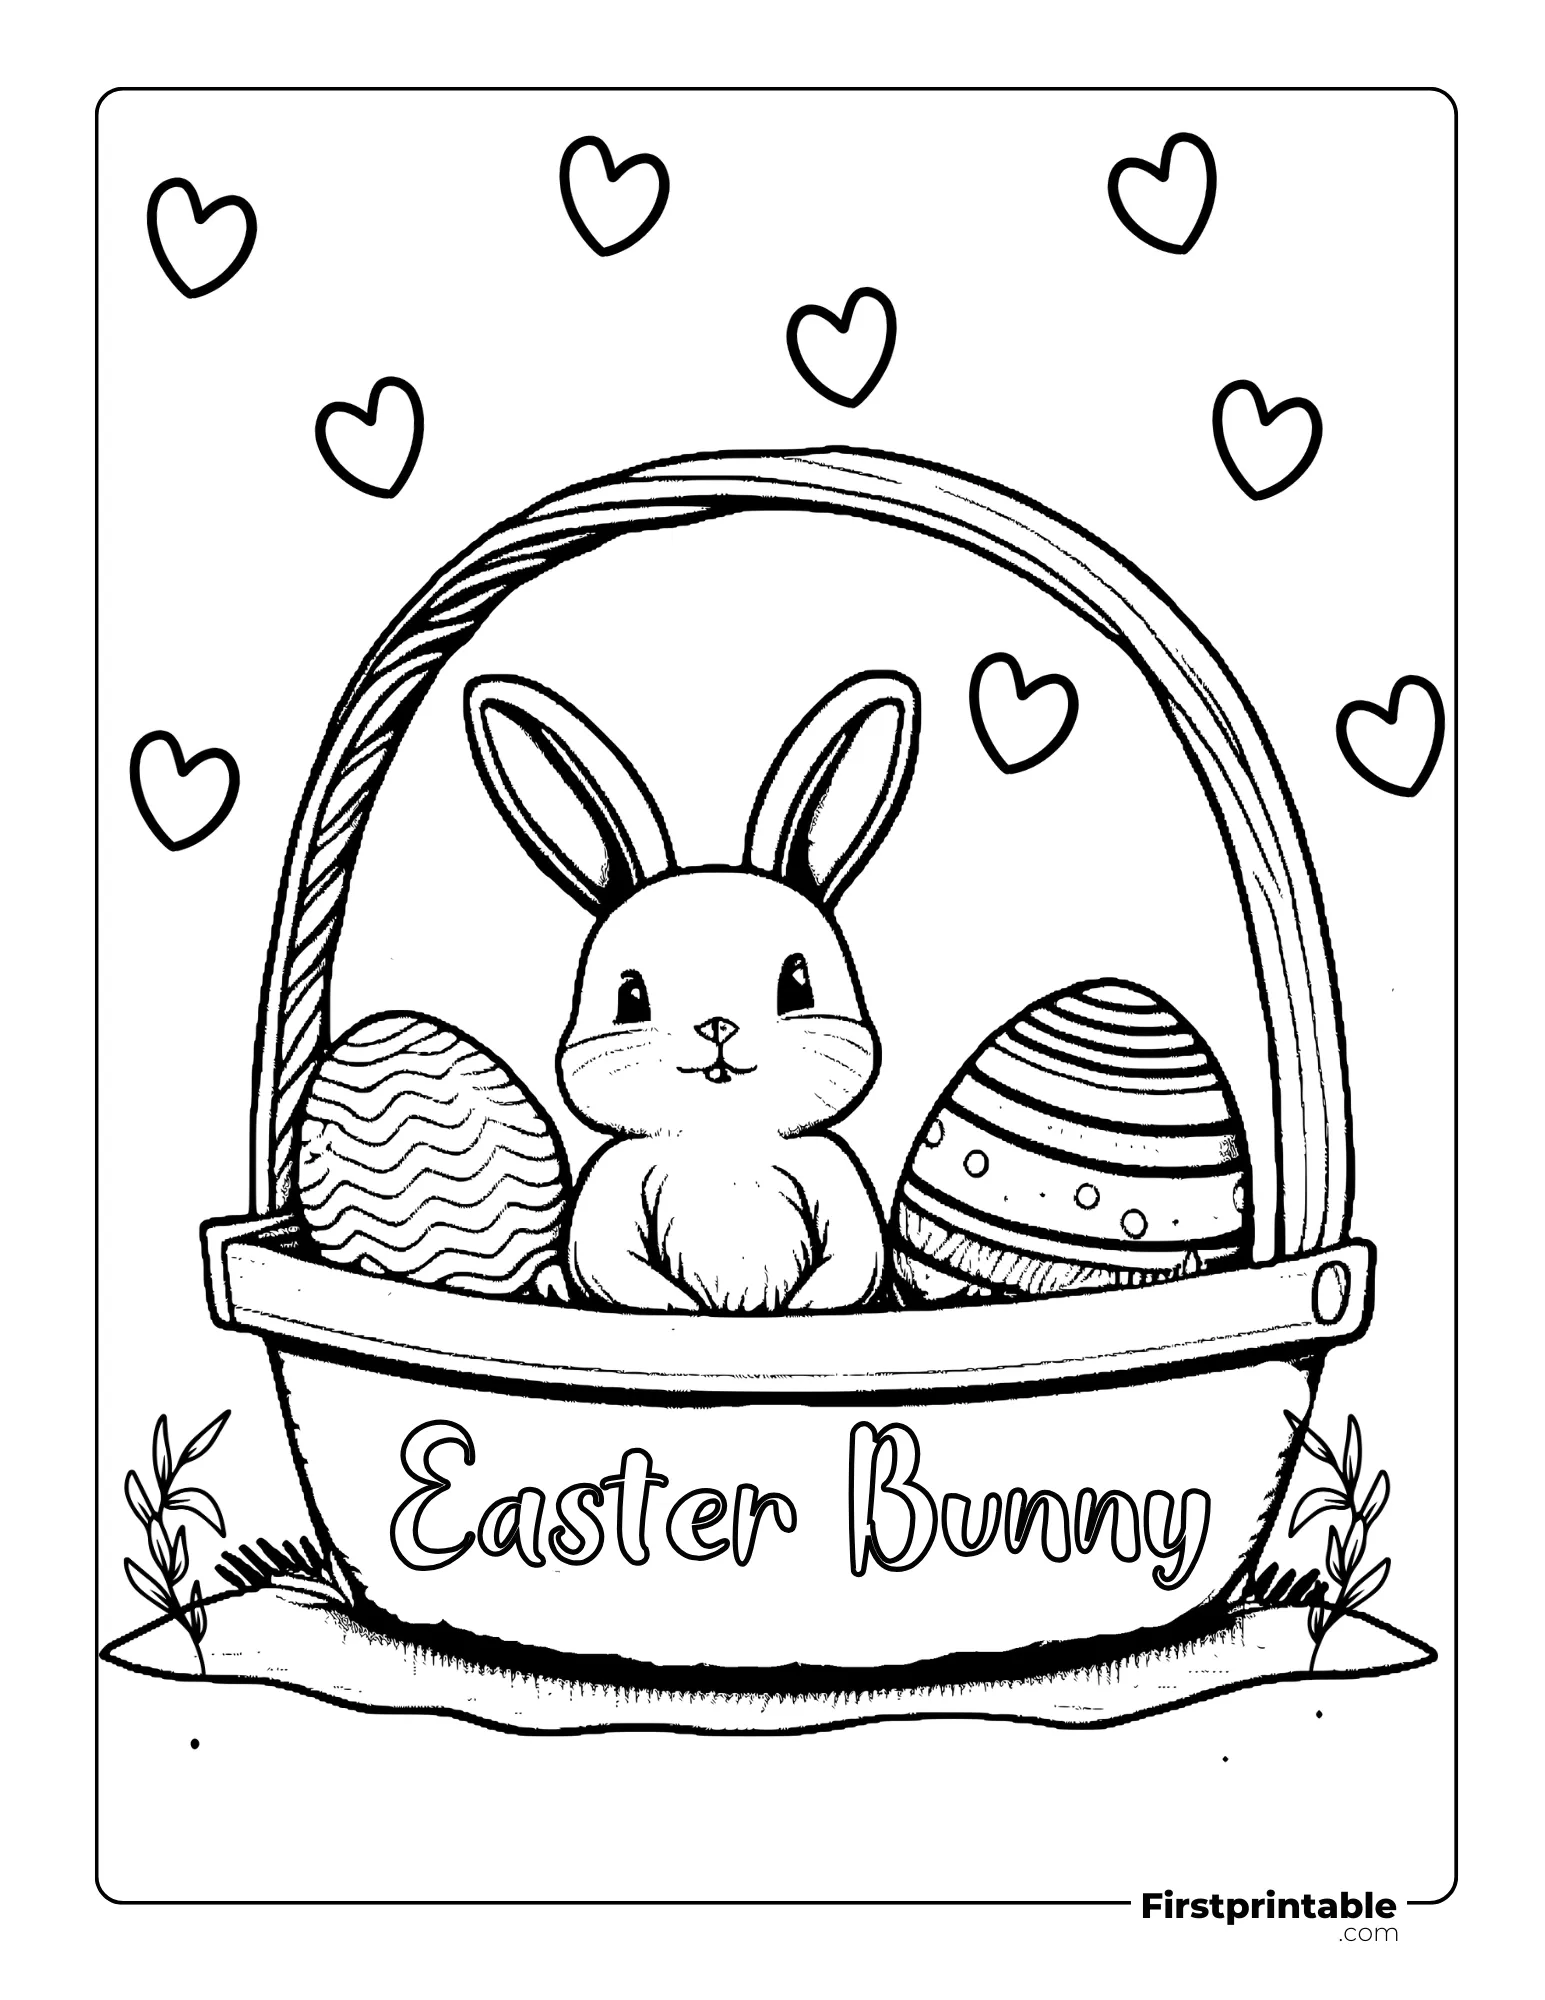 Easter bunny and basket page to color